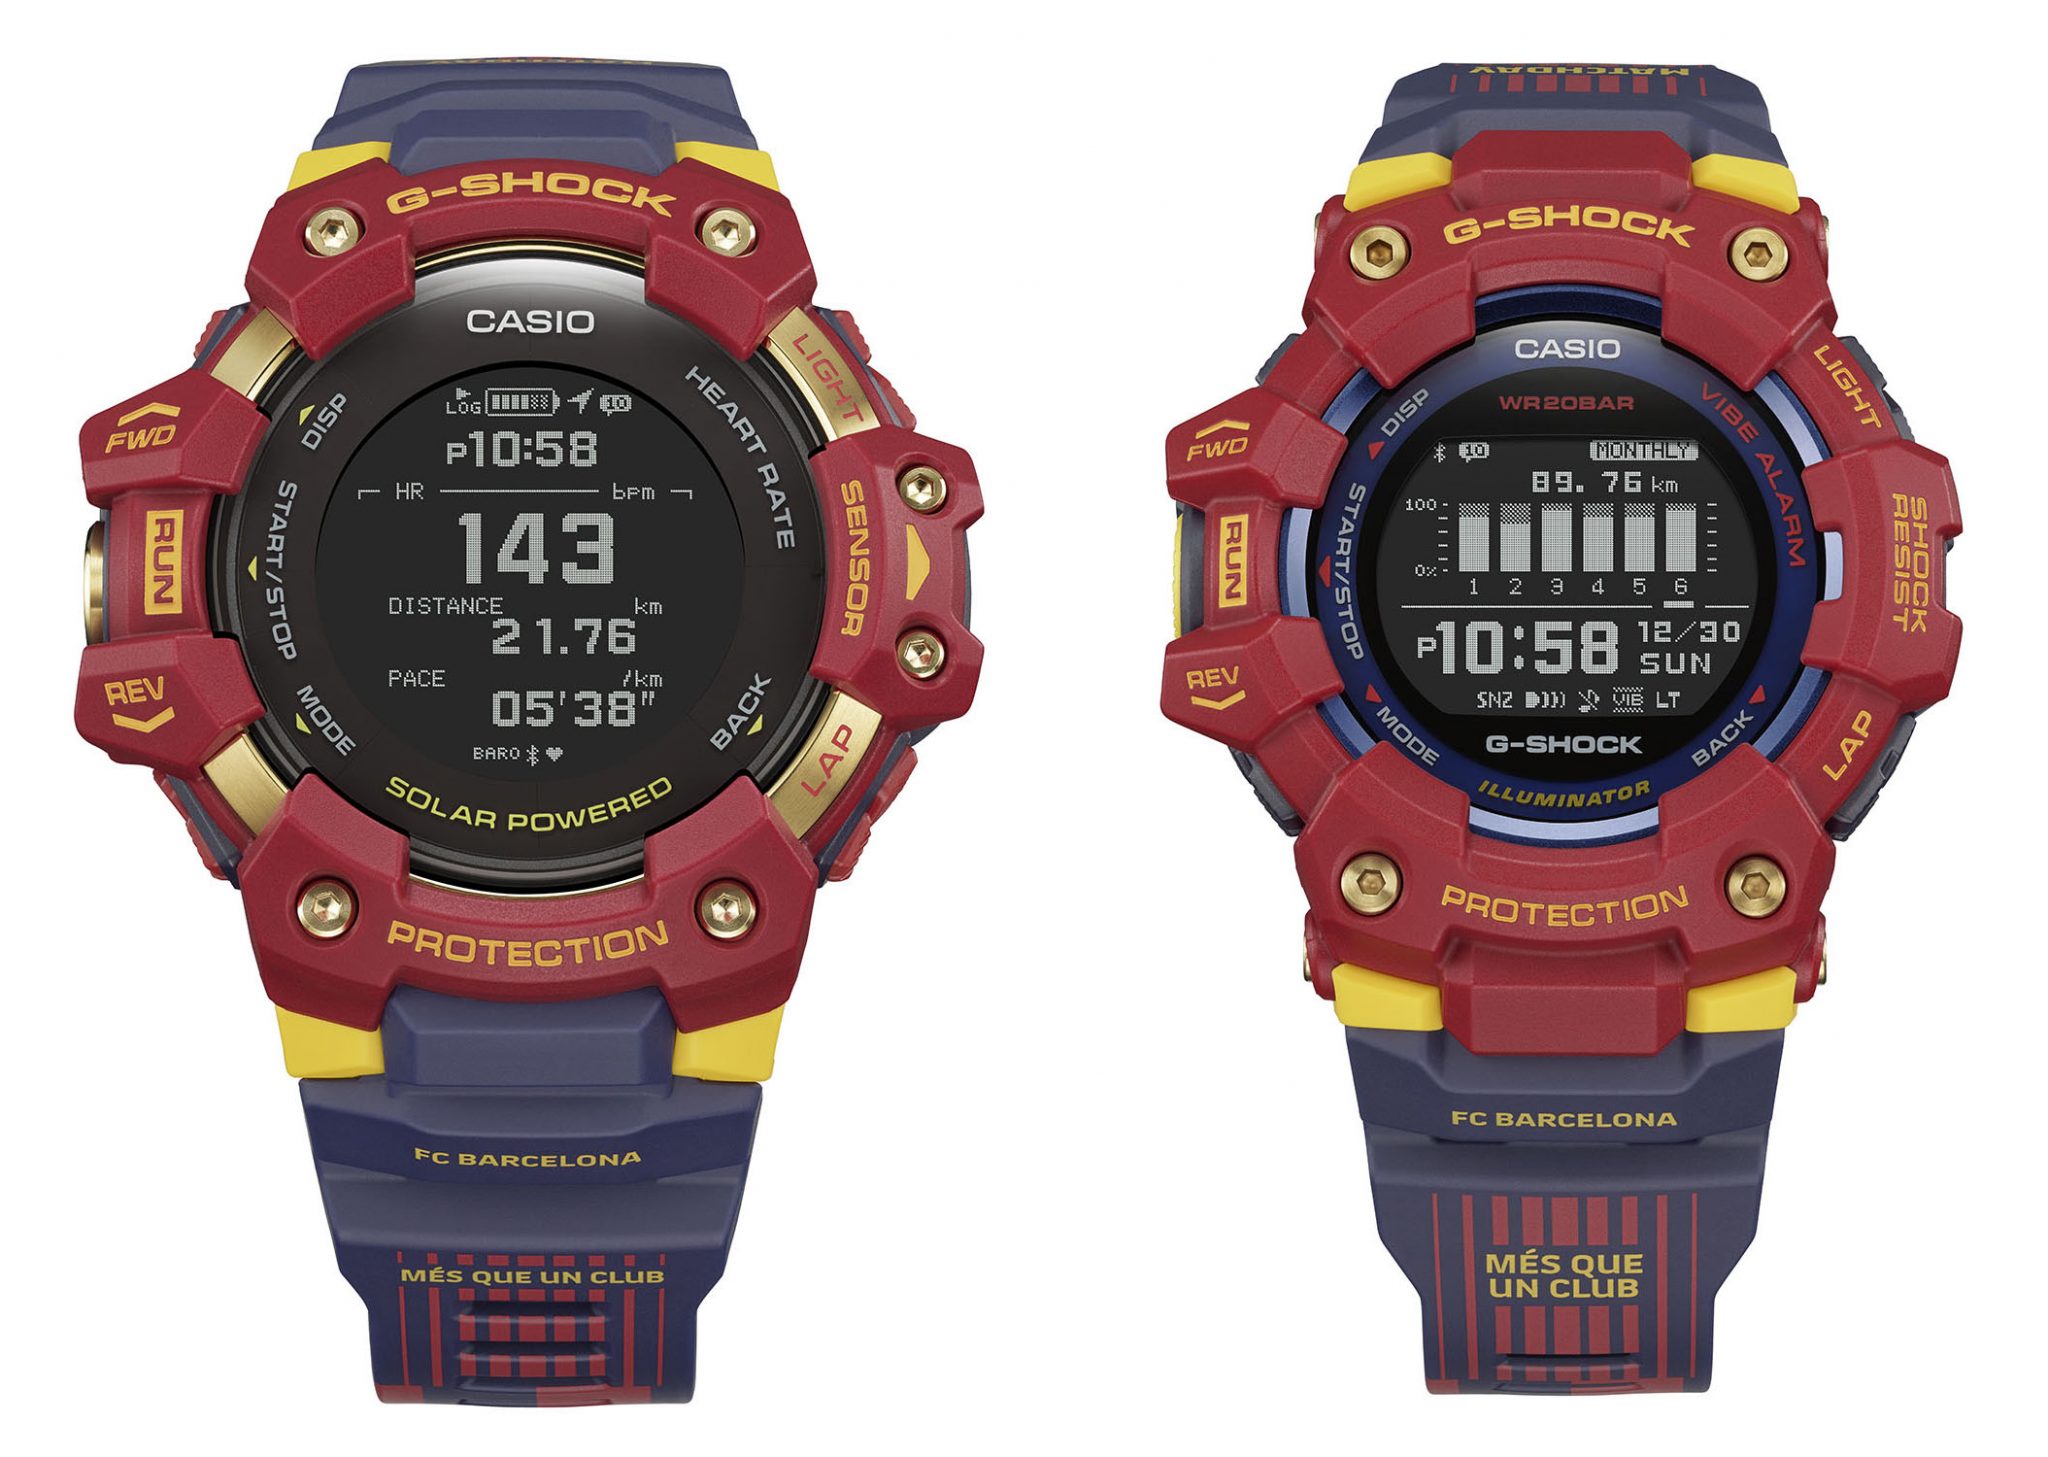 G-Shock slides into soccer world with FC Barcelona-branded watches